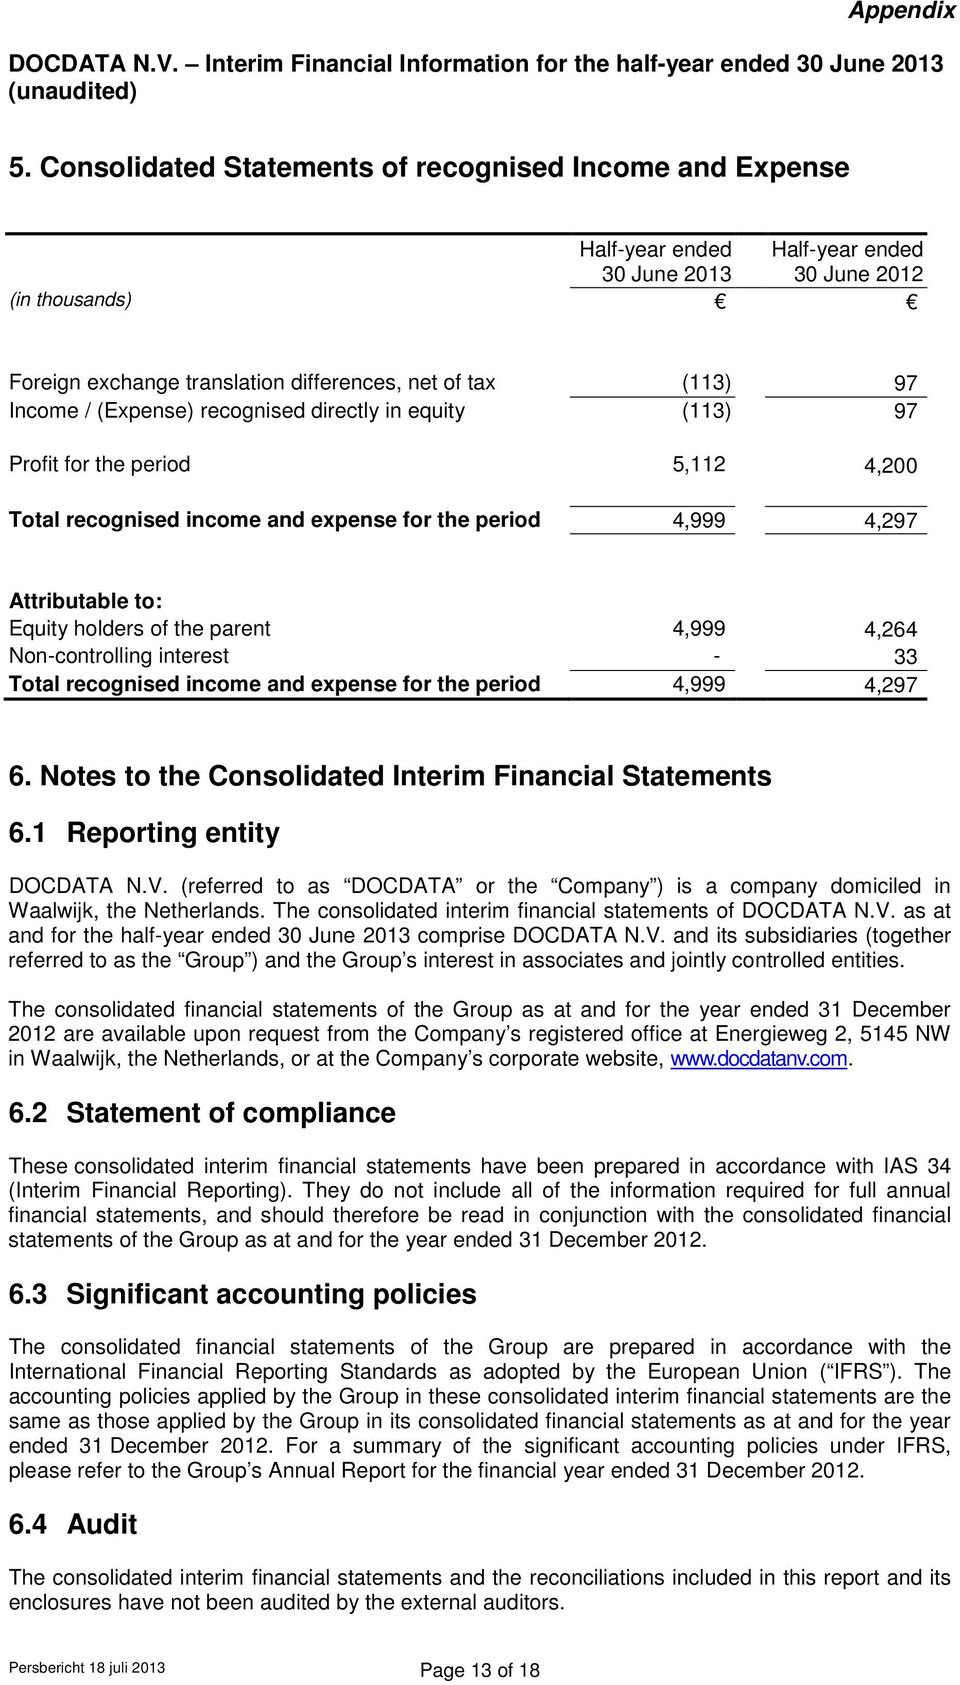 parent 4,999 4,264 Non-controlling interest - 33 Total recognised income and expense for the period 4,999 4,297 6. Notes to the Consolidated Interim Financial Statements 6.